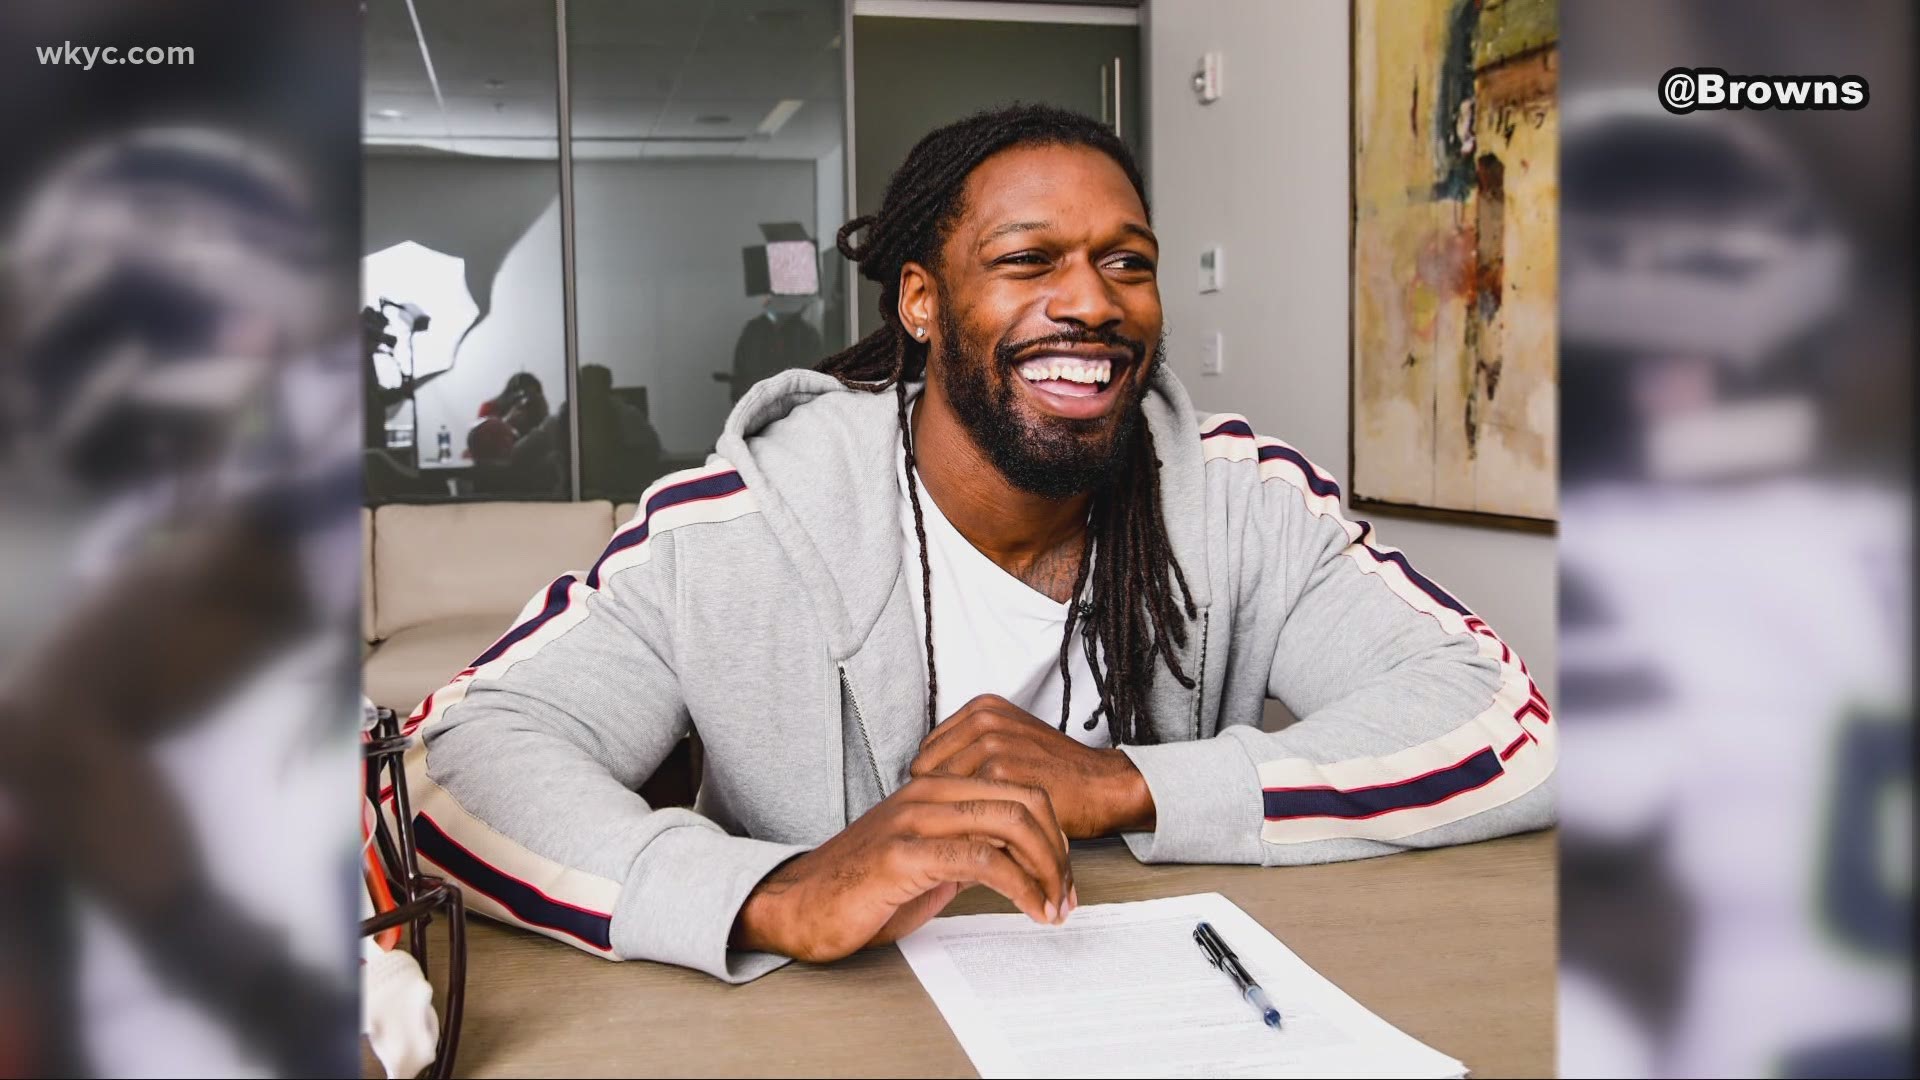 Jim Donovan breaks down the Browns signing of Jadeveon Clowney. It's a one-year deal with the Browns for around $10 million dollars.